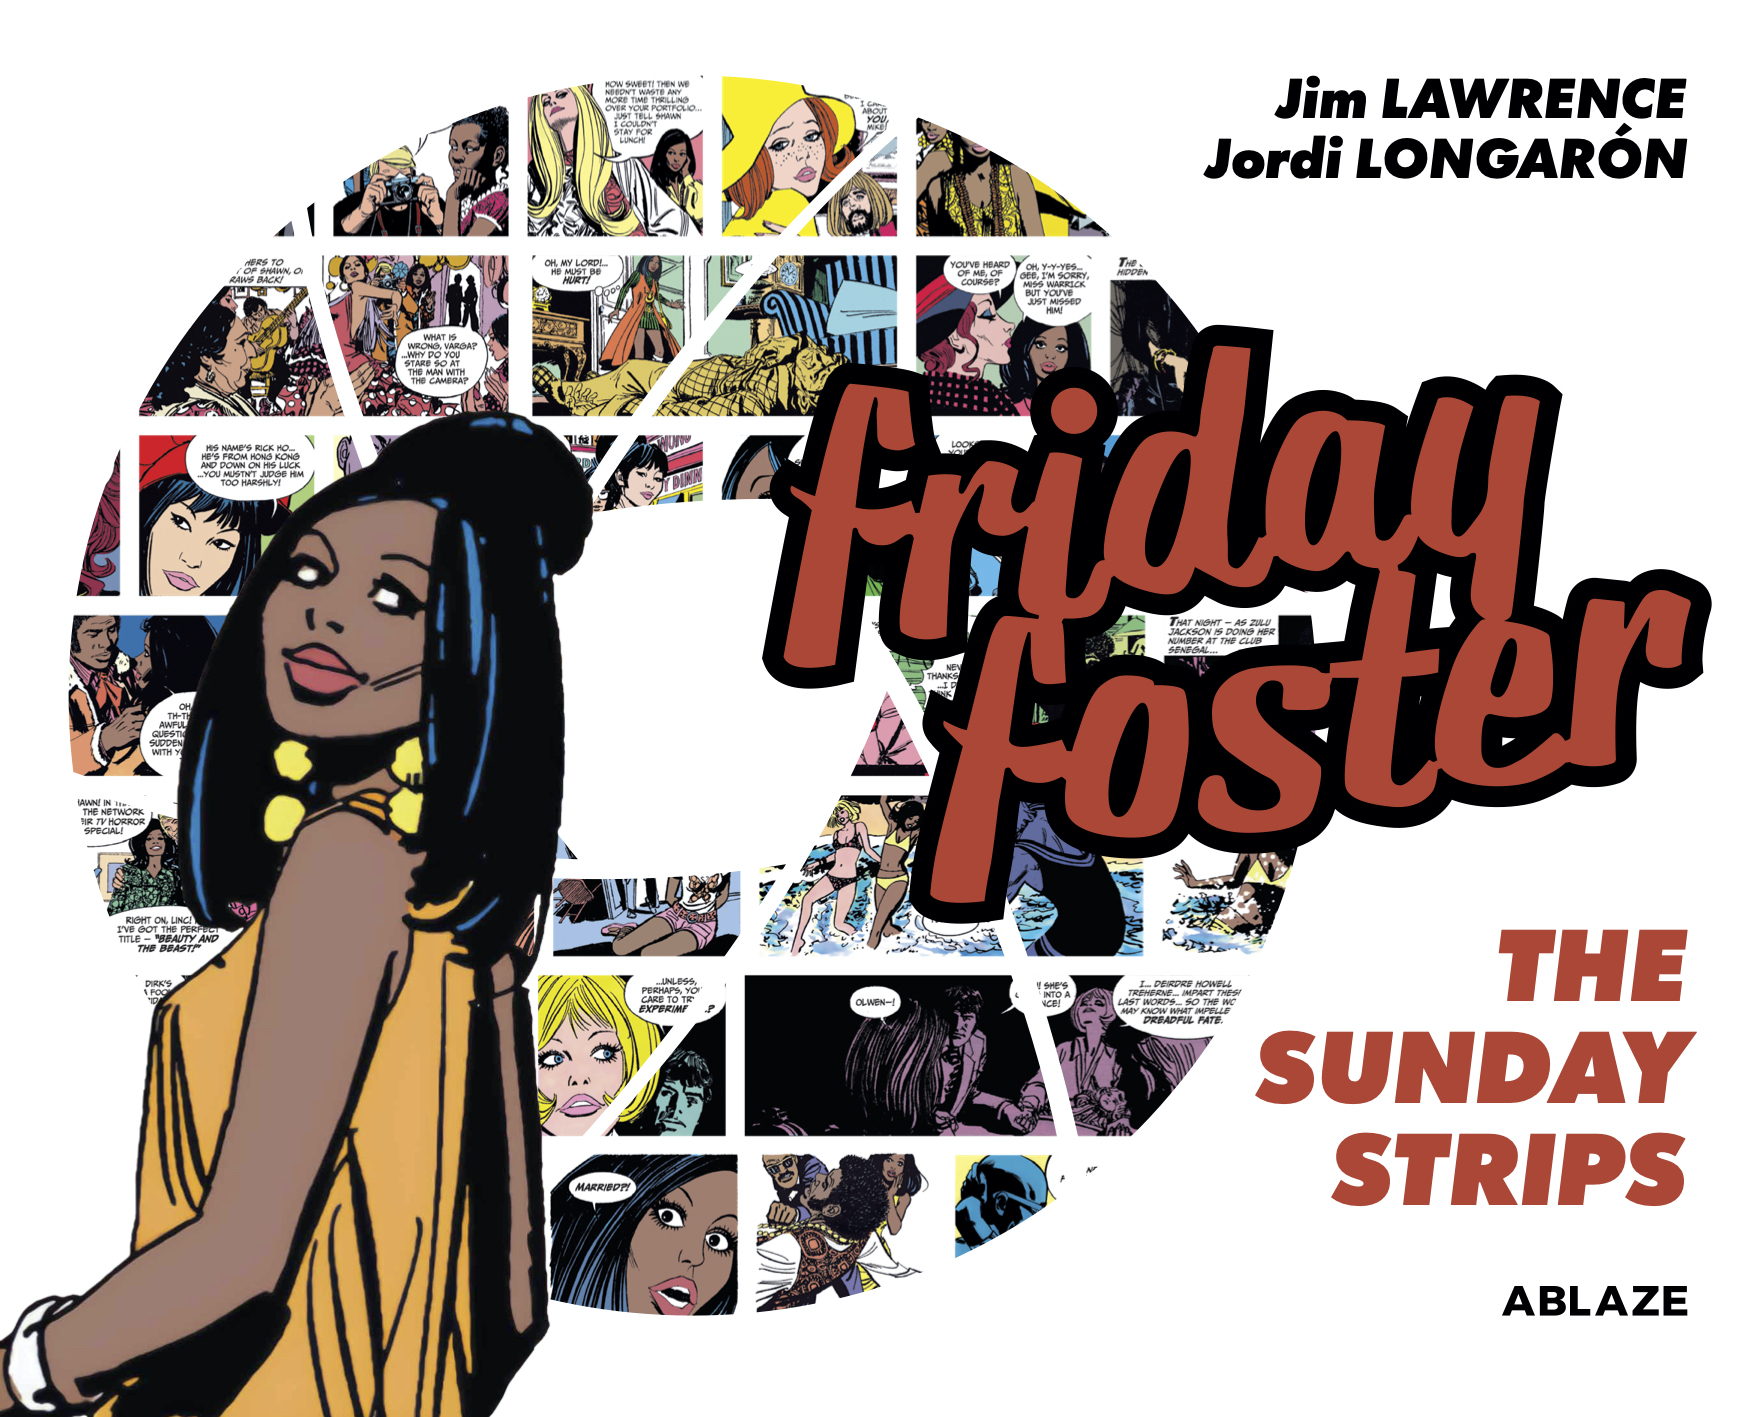 Friday Foster Collected Hardcover